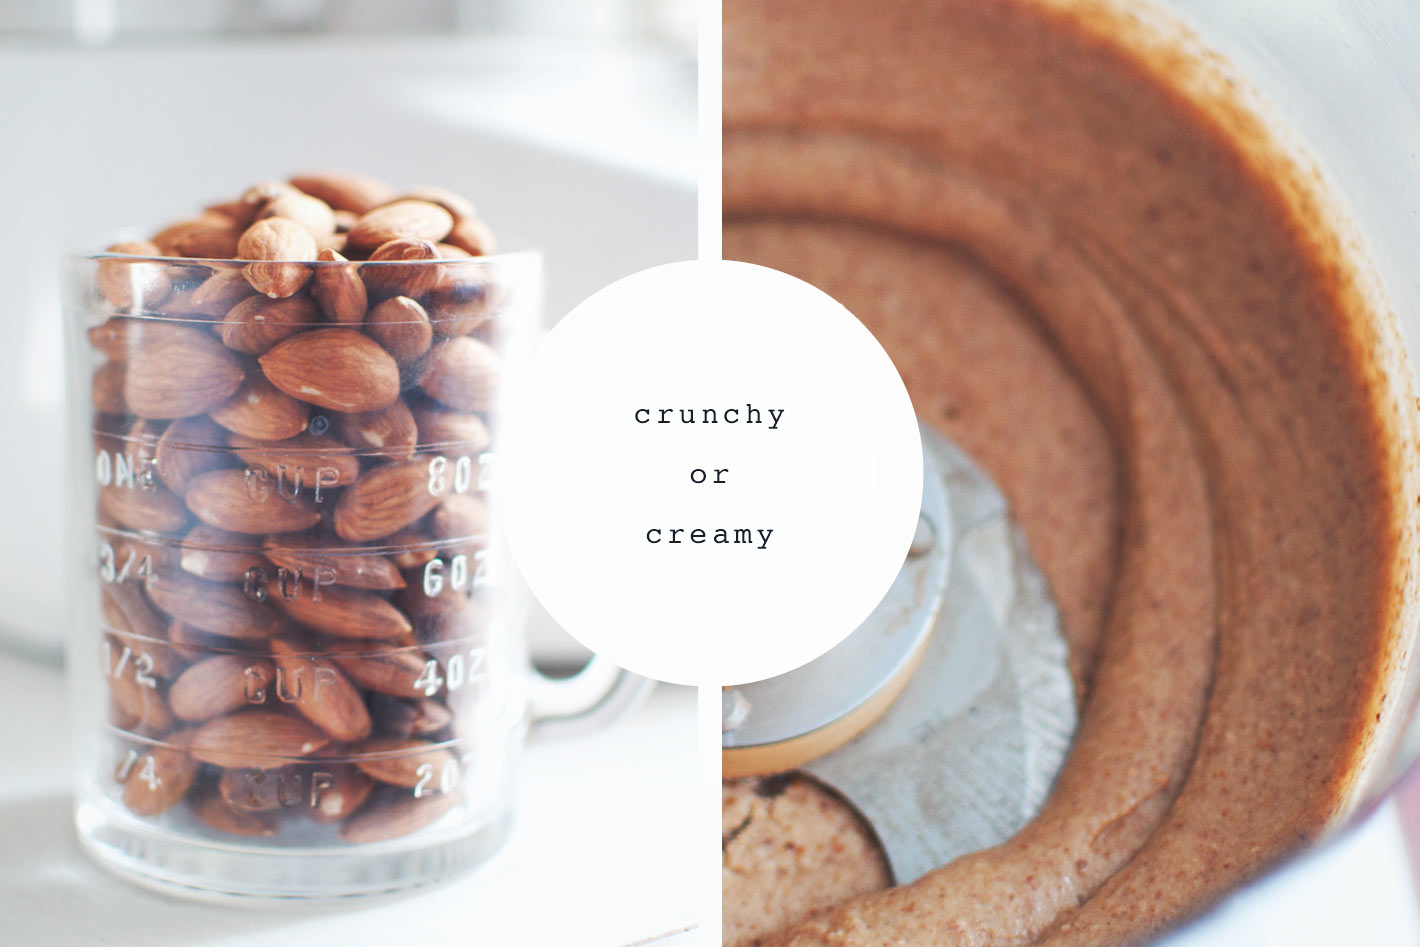 How to MHow to Make Almond Butter | Wake the Wolvesake Almond Butter | Wake the Wolves